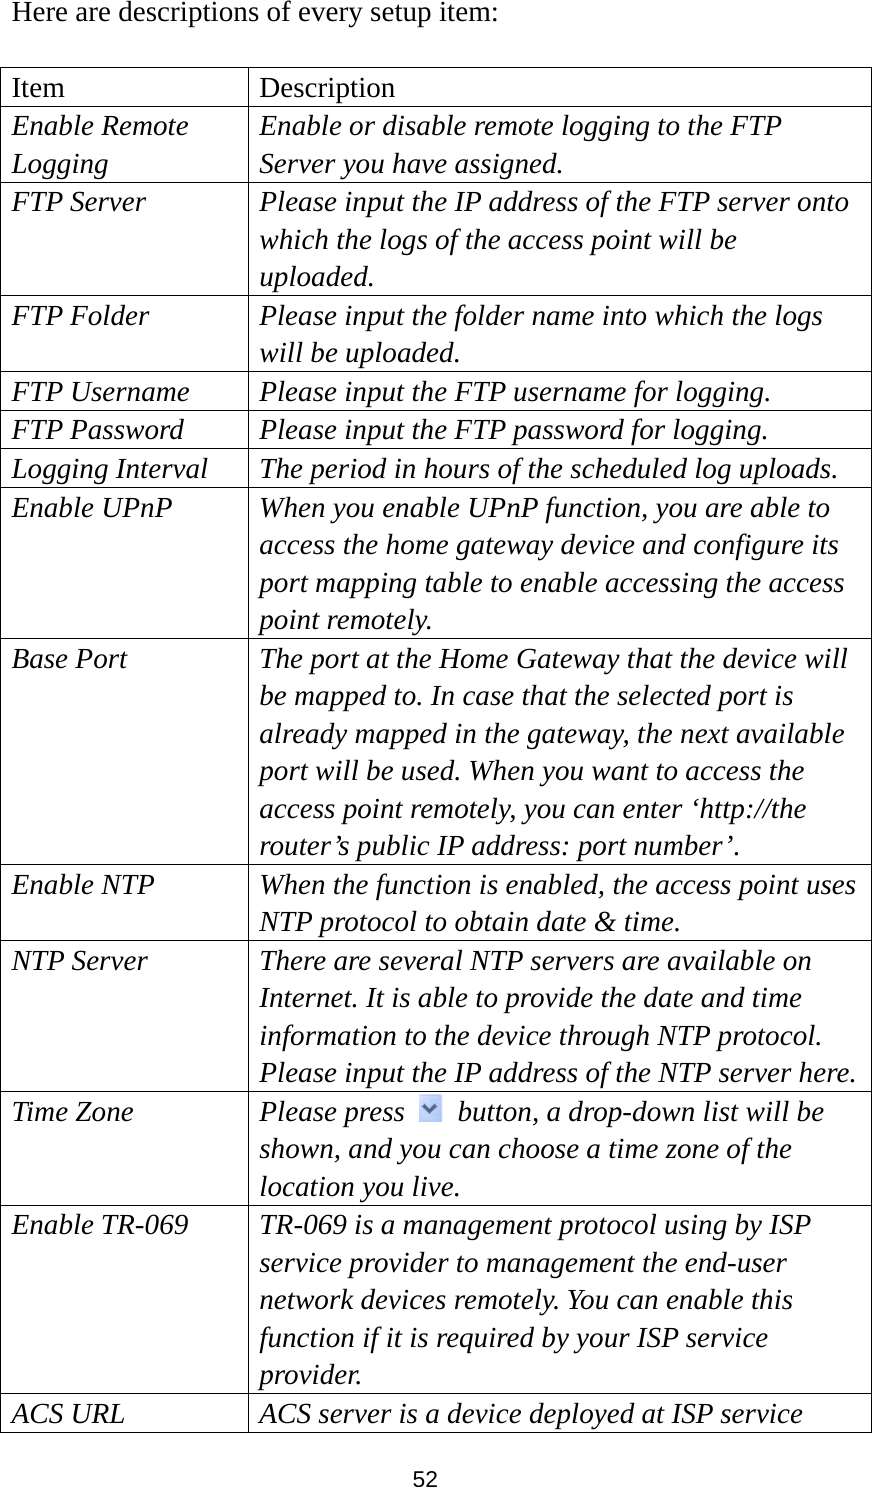 52 Here are descriptions of every setup item:  Item Description Enable Remote Logging Enable or disable remote logging to the FTP Server you have assigned. FTP Server  Please input the IP address of the FTP server onto which the logs of the access point will be uploaded. FTP Folder  Please input the folder name into which the logs will be uploaded. FTP Username  Please input the FTP username for logging. FTP Password  Please input the FTP password for logging. Logging Interval  The period in hours of the scheduled log uploads. Enable UPnP  When you enable UPnP function, you are able to access the home gateway device and configure its port mapping table to enable accessing the access point remotely. Base Port  The port at the Home Gateway that the device will be mapped to. In case that the selected port is already mapped in the gateway, the next available port will be used. When you want to access the access point remotely, you can enter ‘http://the router’s public IP address: port number’. Enable NTP  When the function is enabled, the access point uses NTP protocol to obtain date &amp; time. NTP Server  There are several NTP servers are available on Internet. It is able to provide the date and time information to the device through NTP protocol. Please input the IP address of the NTP server here.Time Zone  Please press    button, a drop-down list will be shown, and you can choose a time zone of the location you live. Enable TR-069  TR-069 is a management protocol using by ISP service provider to management the end-user network devices remotely. You can enable this function if it is required by your ISP service provider. ACS URL  ACS server is a device deployed at ISP service 